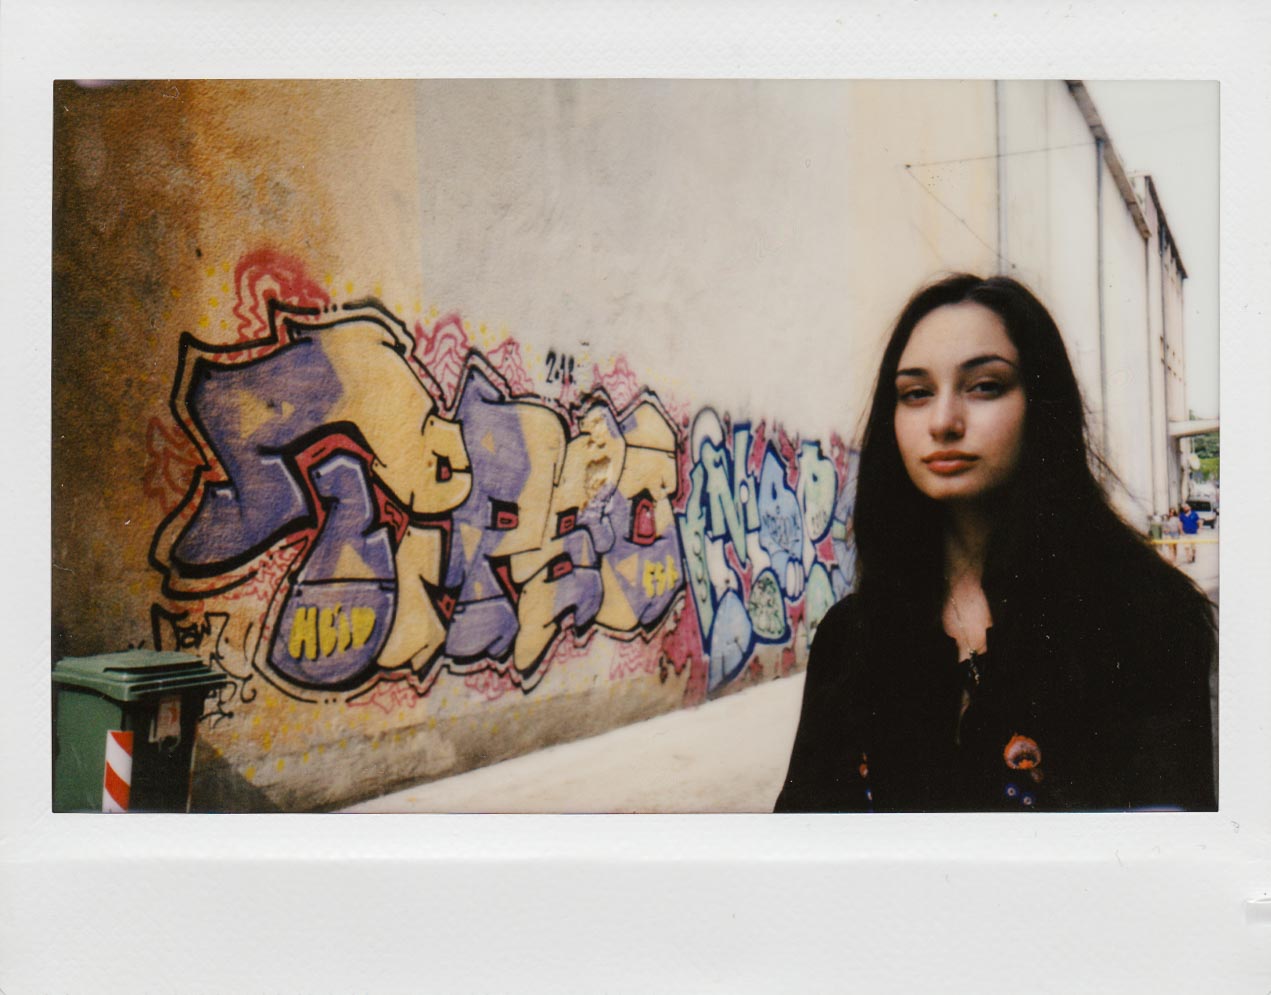 Thoughts about the Fujifilm Instax WIDE 300 — michiel de lange